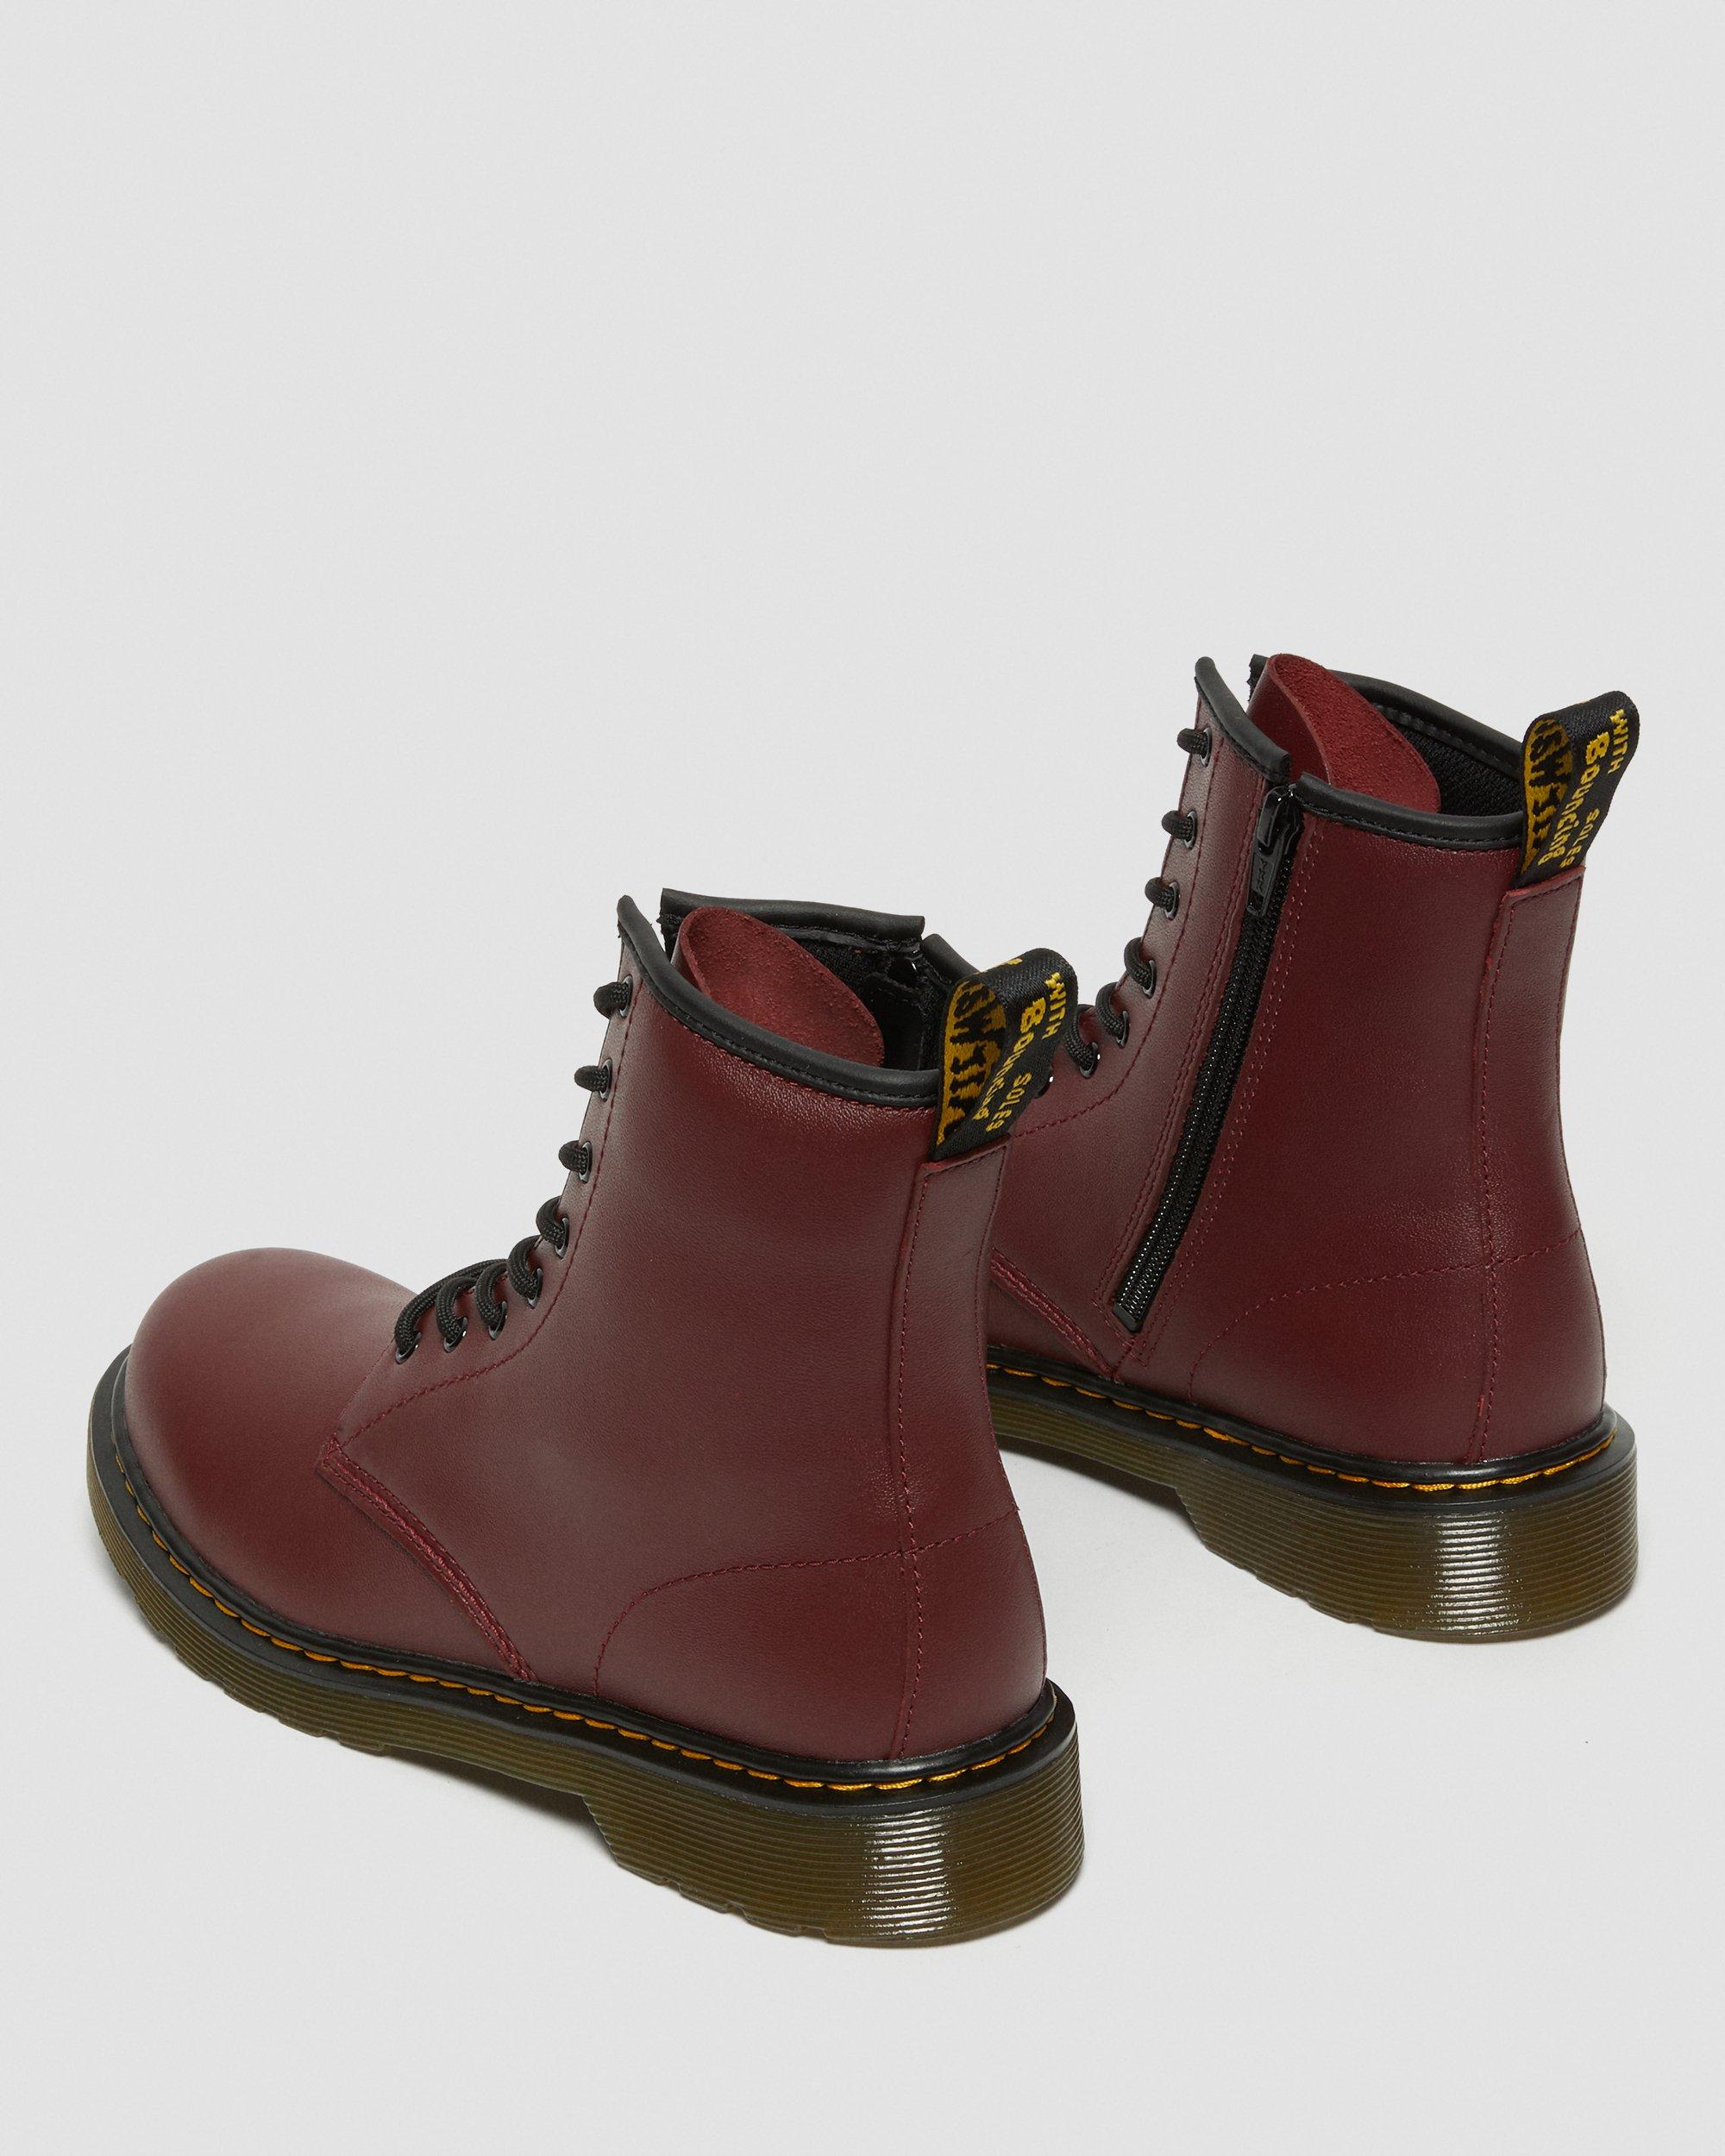 Youth 1460 Softy T Leather Lace Up BootsYouth 1460 Softy T Leather Lace Up Boots Dr. Martens